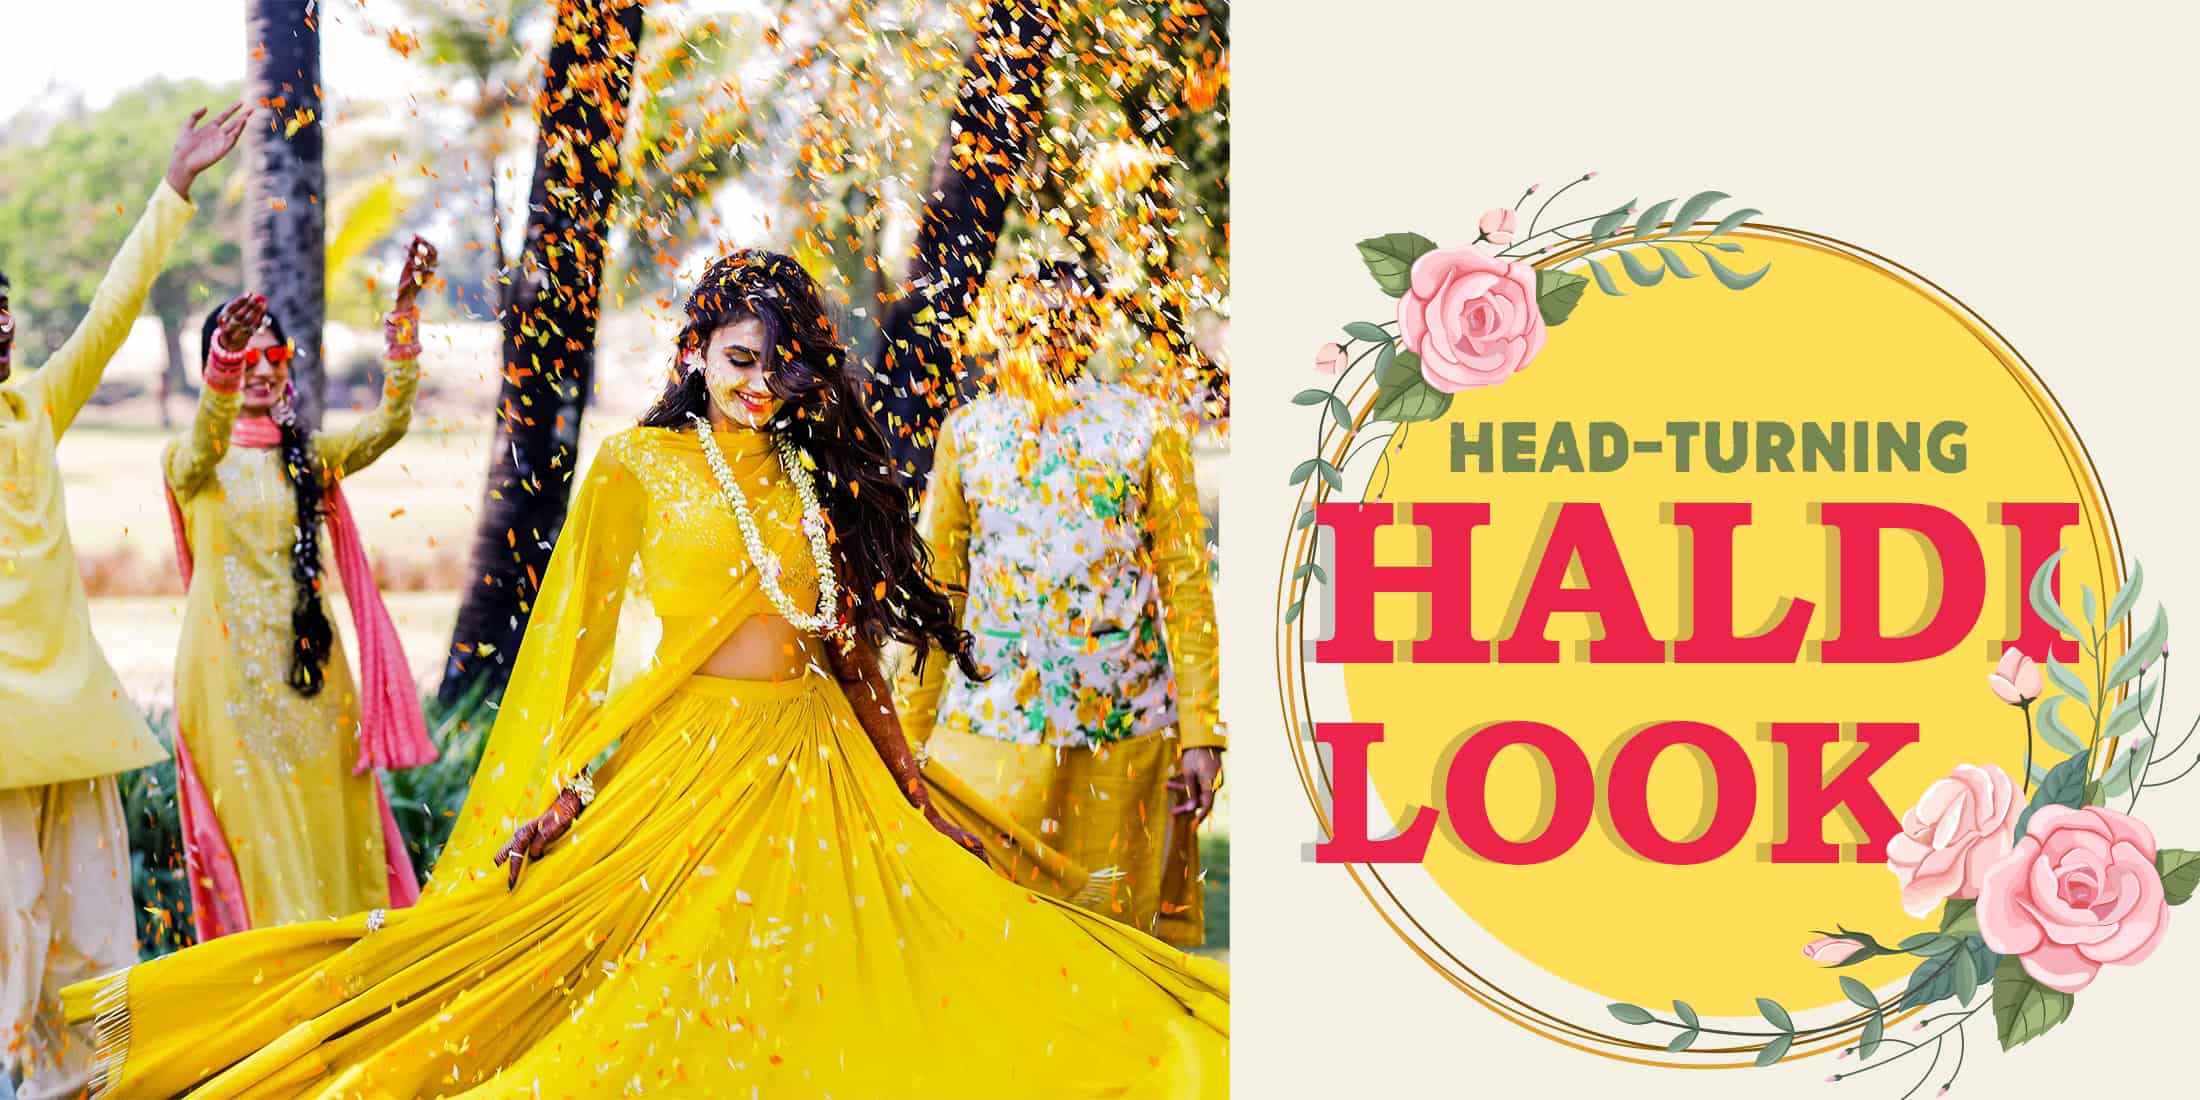 Pin by Aishwarya Latane on wedding | Haldi ceremony outfit, Fashion show  dresses, Haldi outfit for bride